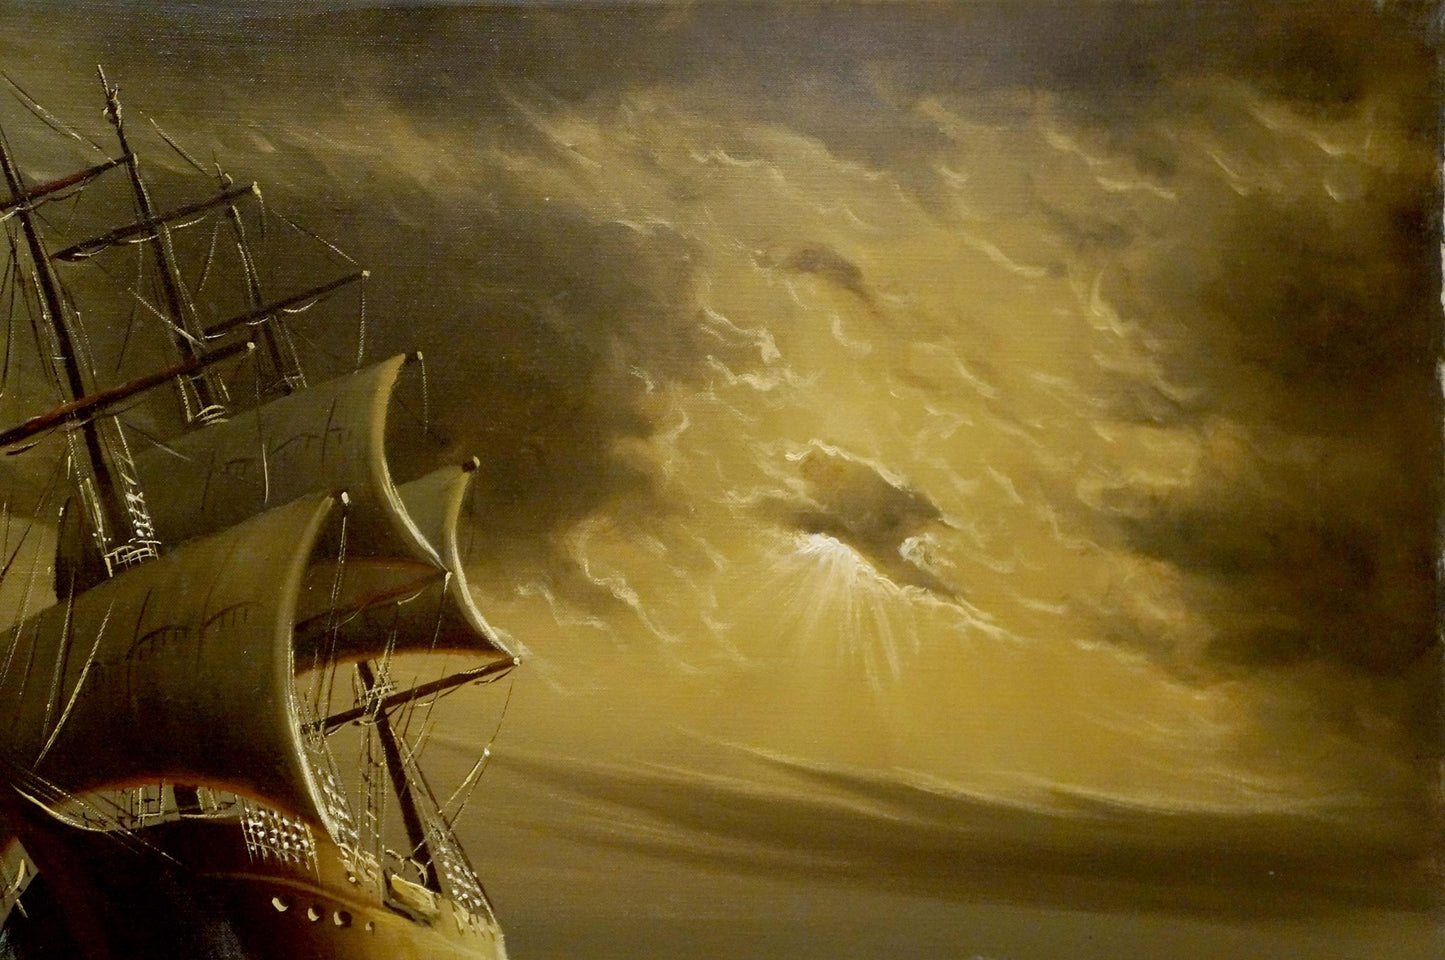 Experience the beauty of "Landscape with a Ship," an oil painting by Mody Kersler